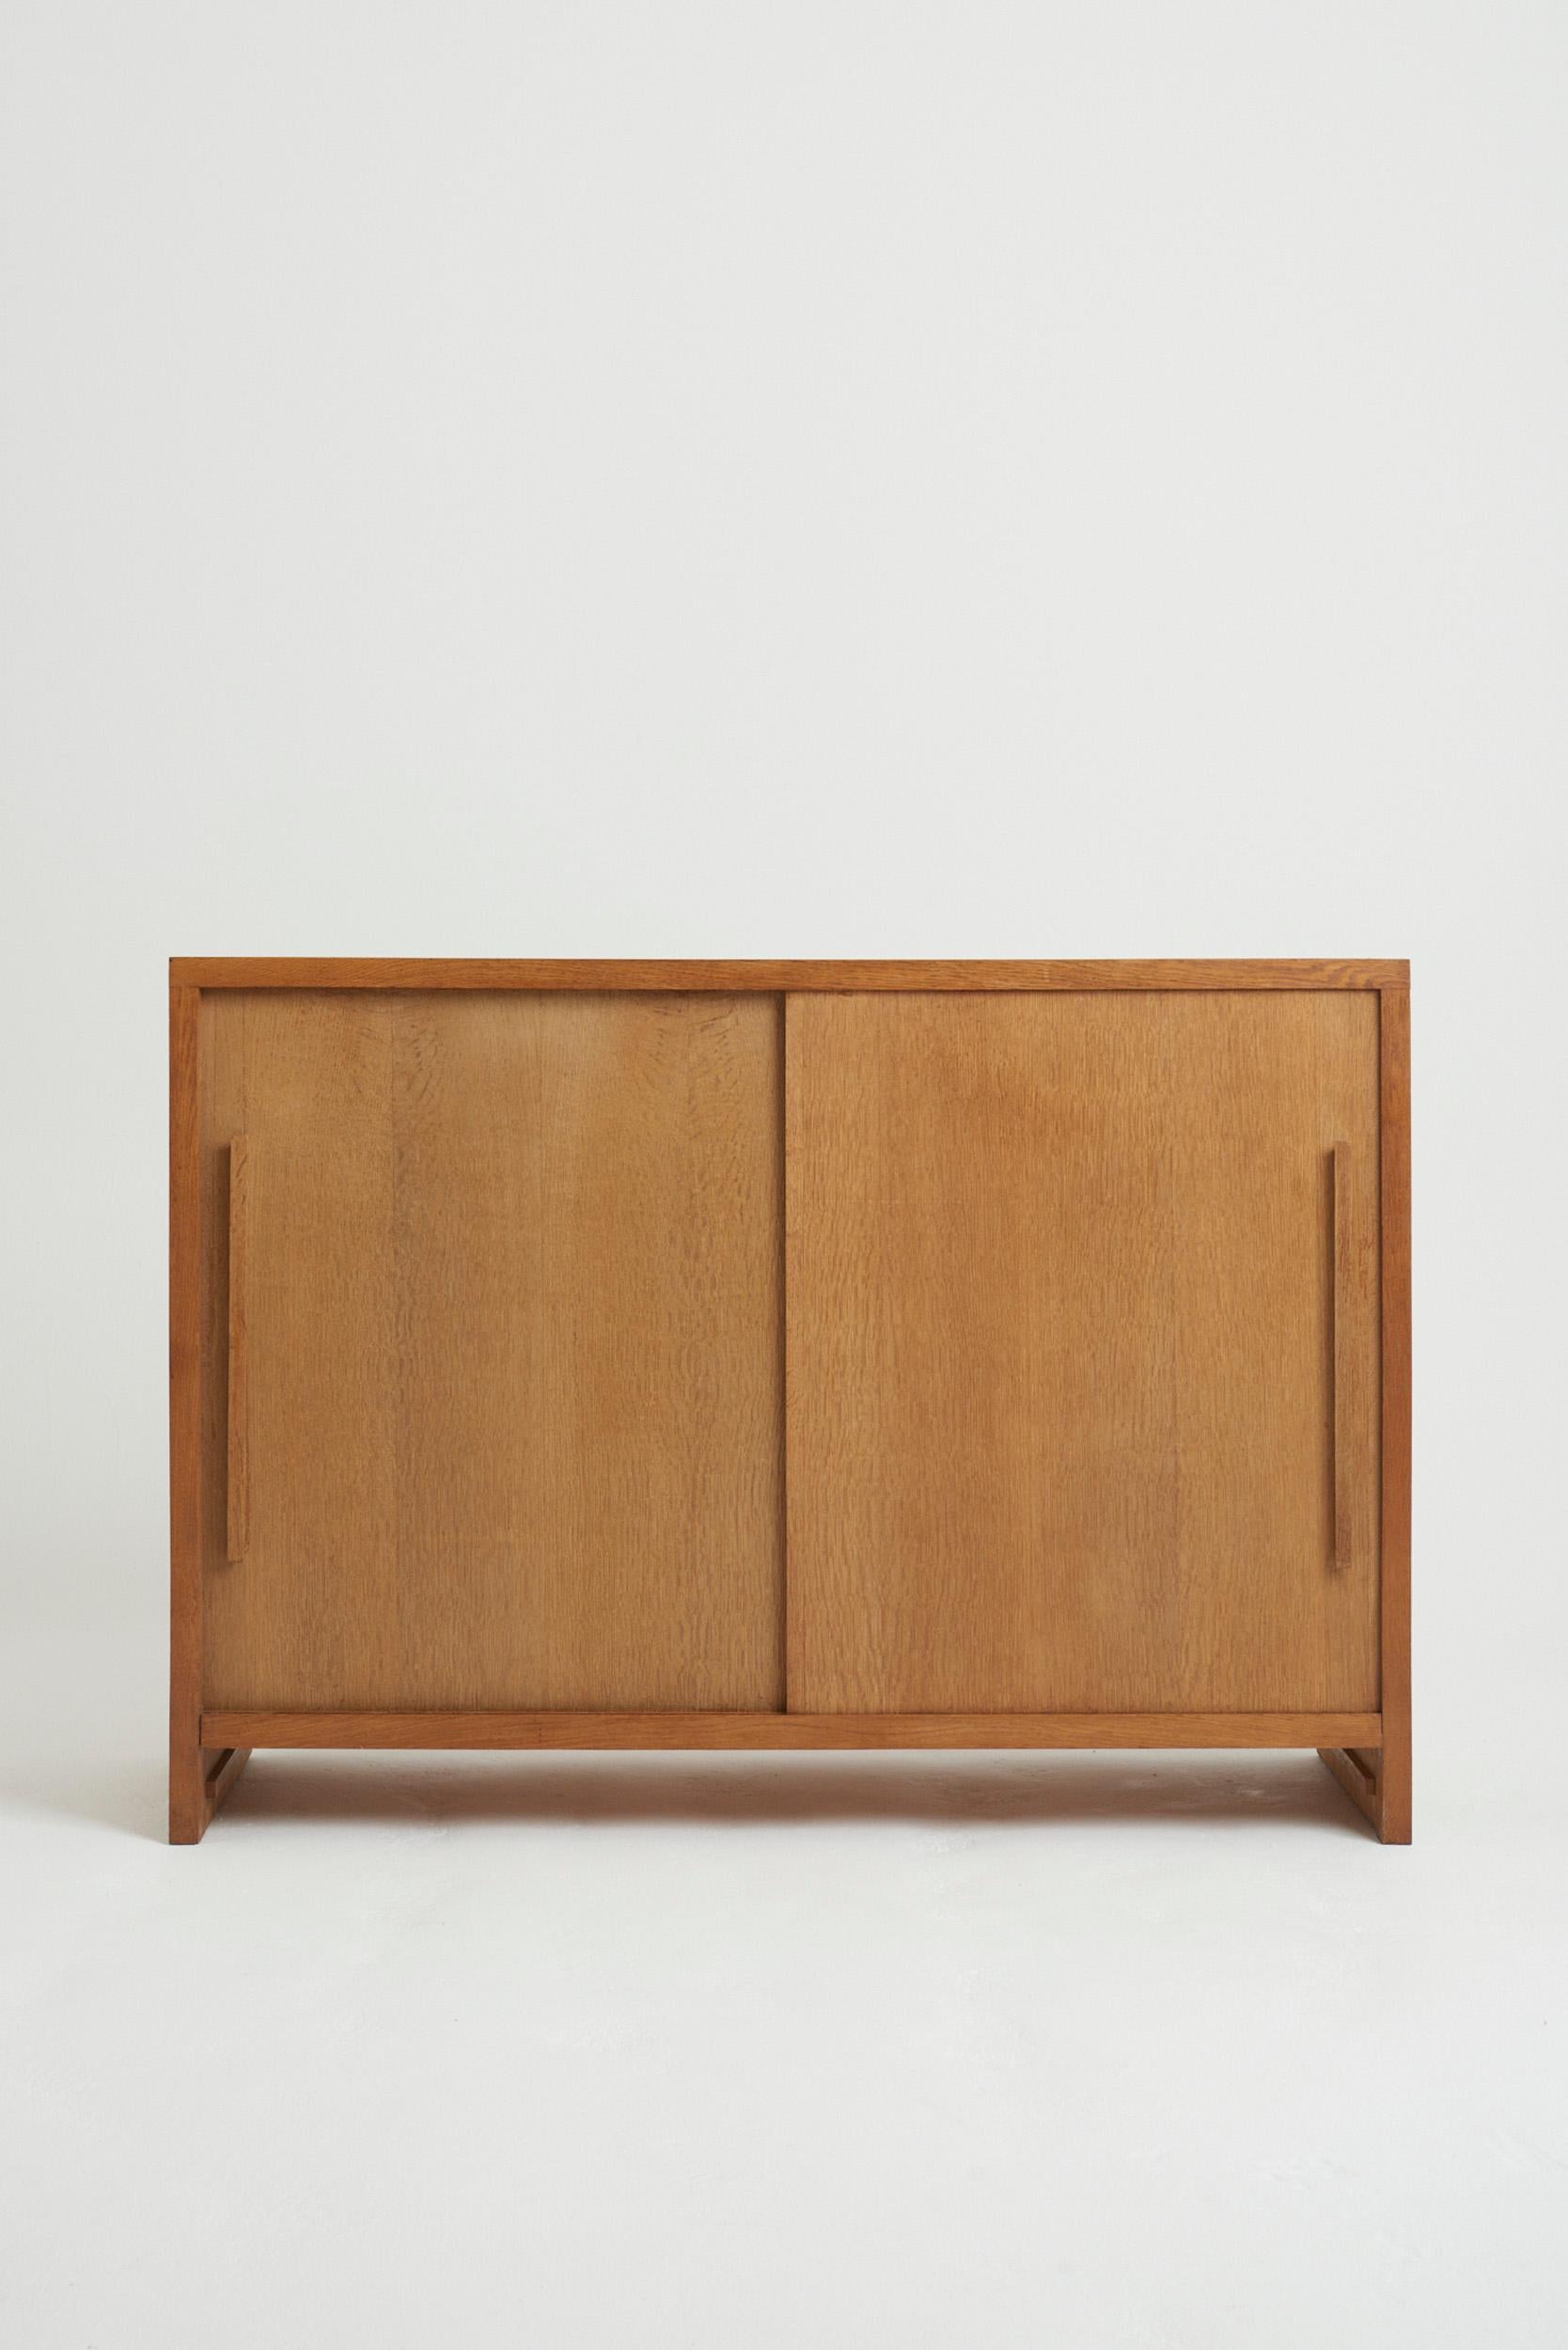 A post-war oak cabinet, with two sliding doors.
France, Circa 1950
100 cm high by 140 cm wide by 50 cm depth